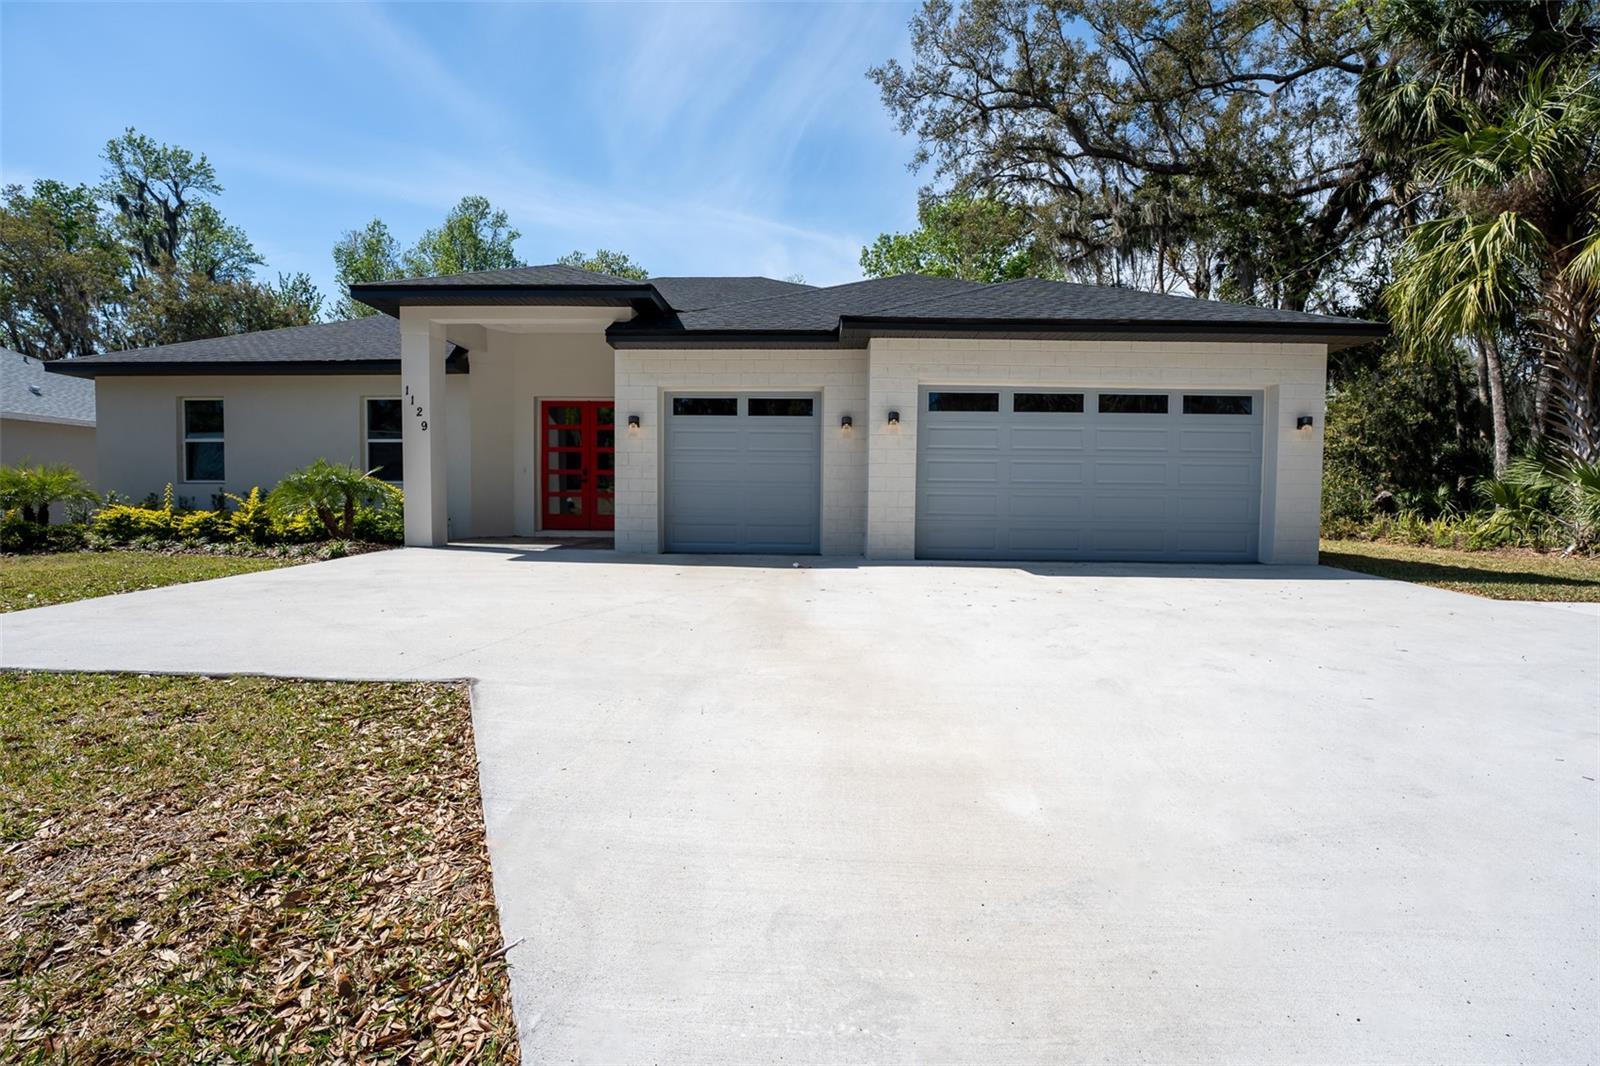 Photo one of 1129 N Central Ave Oviedo FL 32765 | MLS O6183127